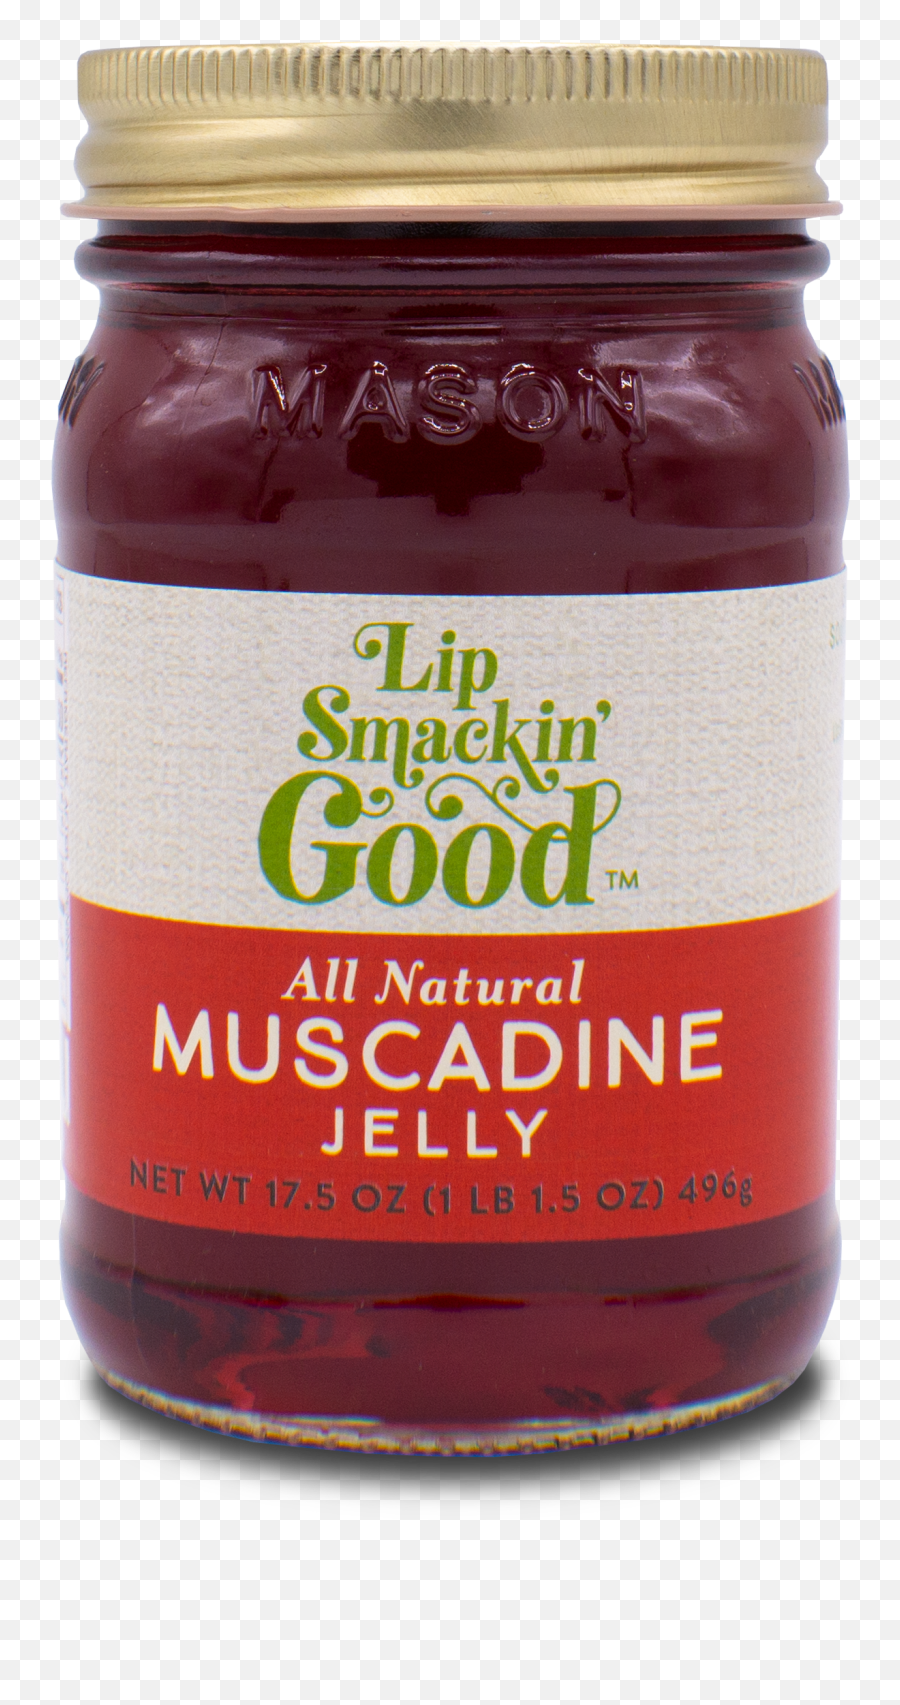 Muscadine Jelly Lip Smackin Good - Chocolate Spread Png,Jelly Jar Png